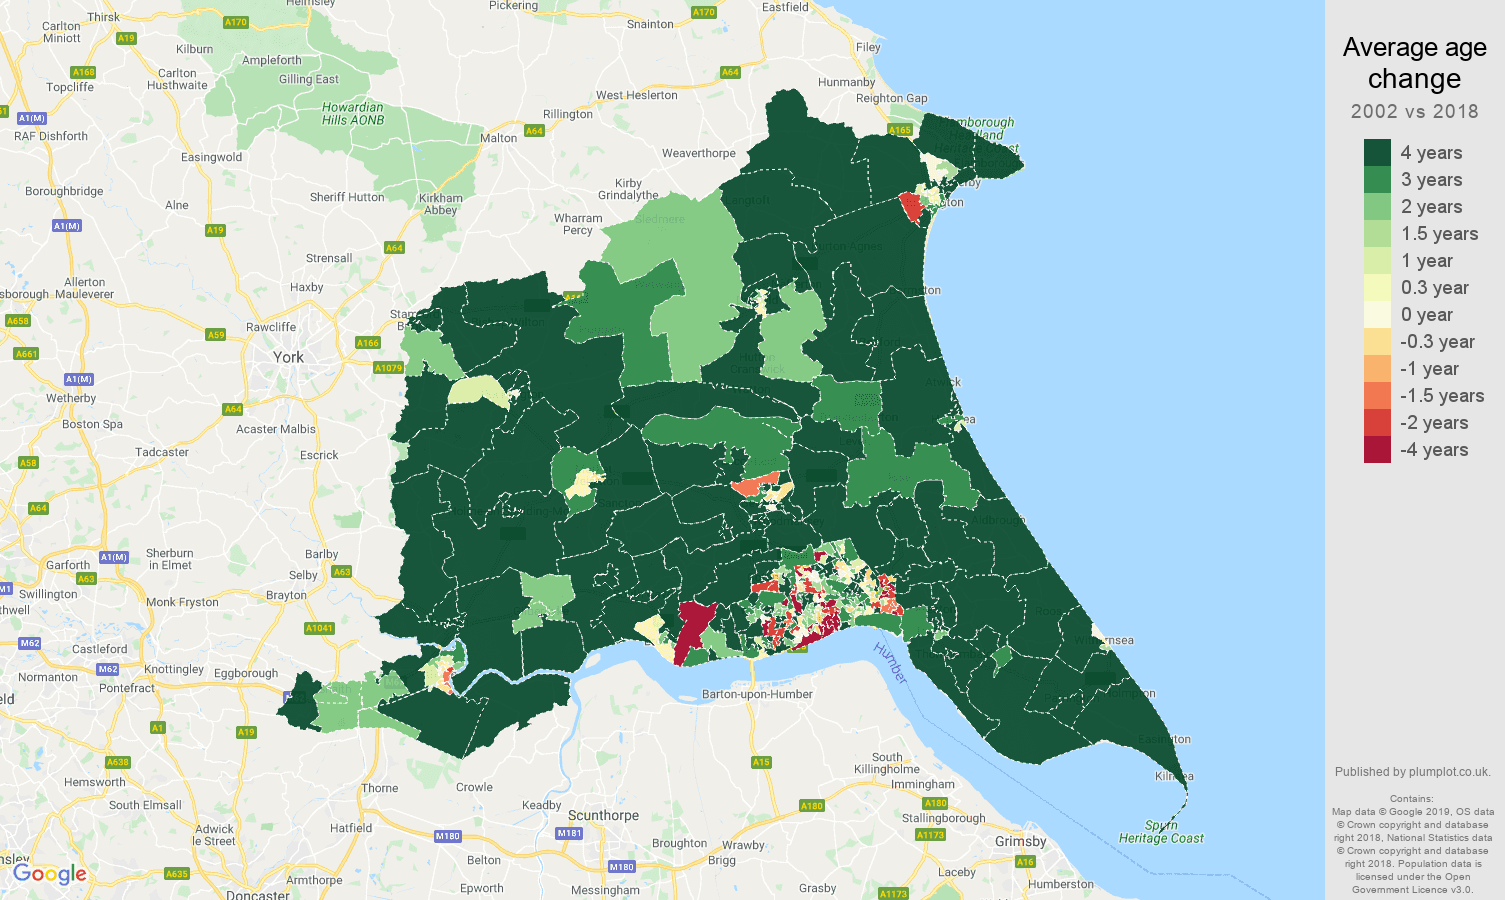 East Riding of Yorkshire average age change map